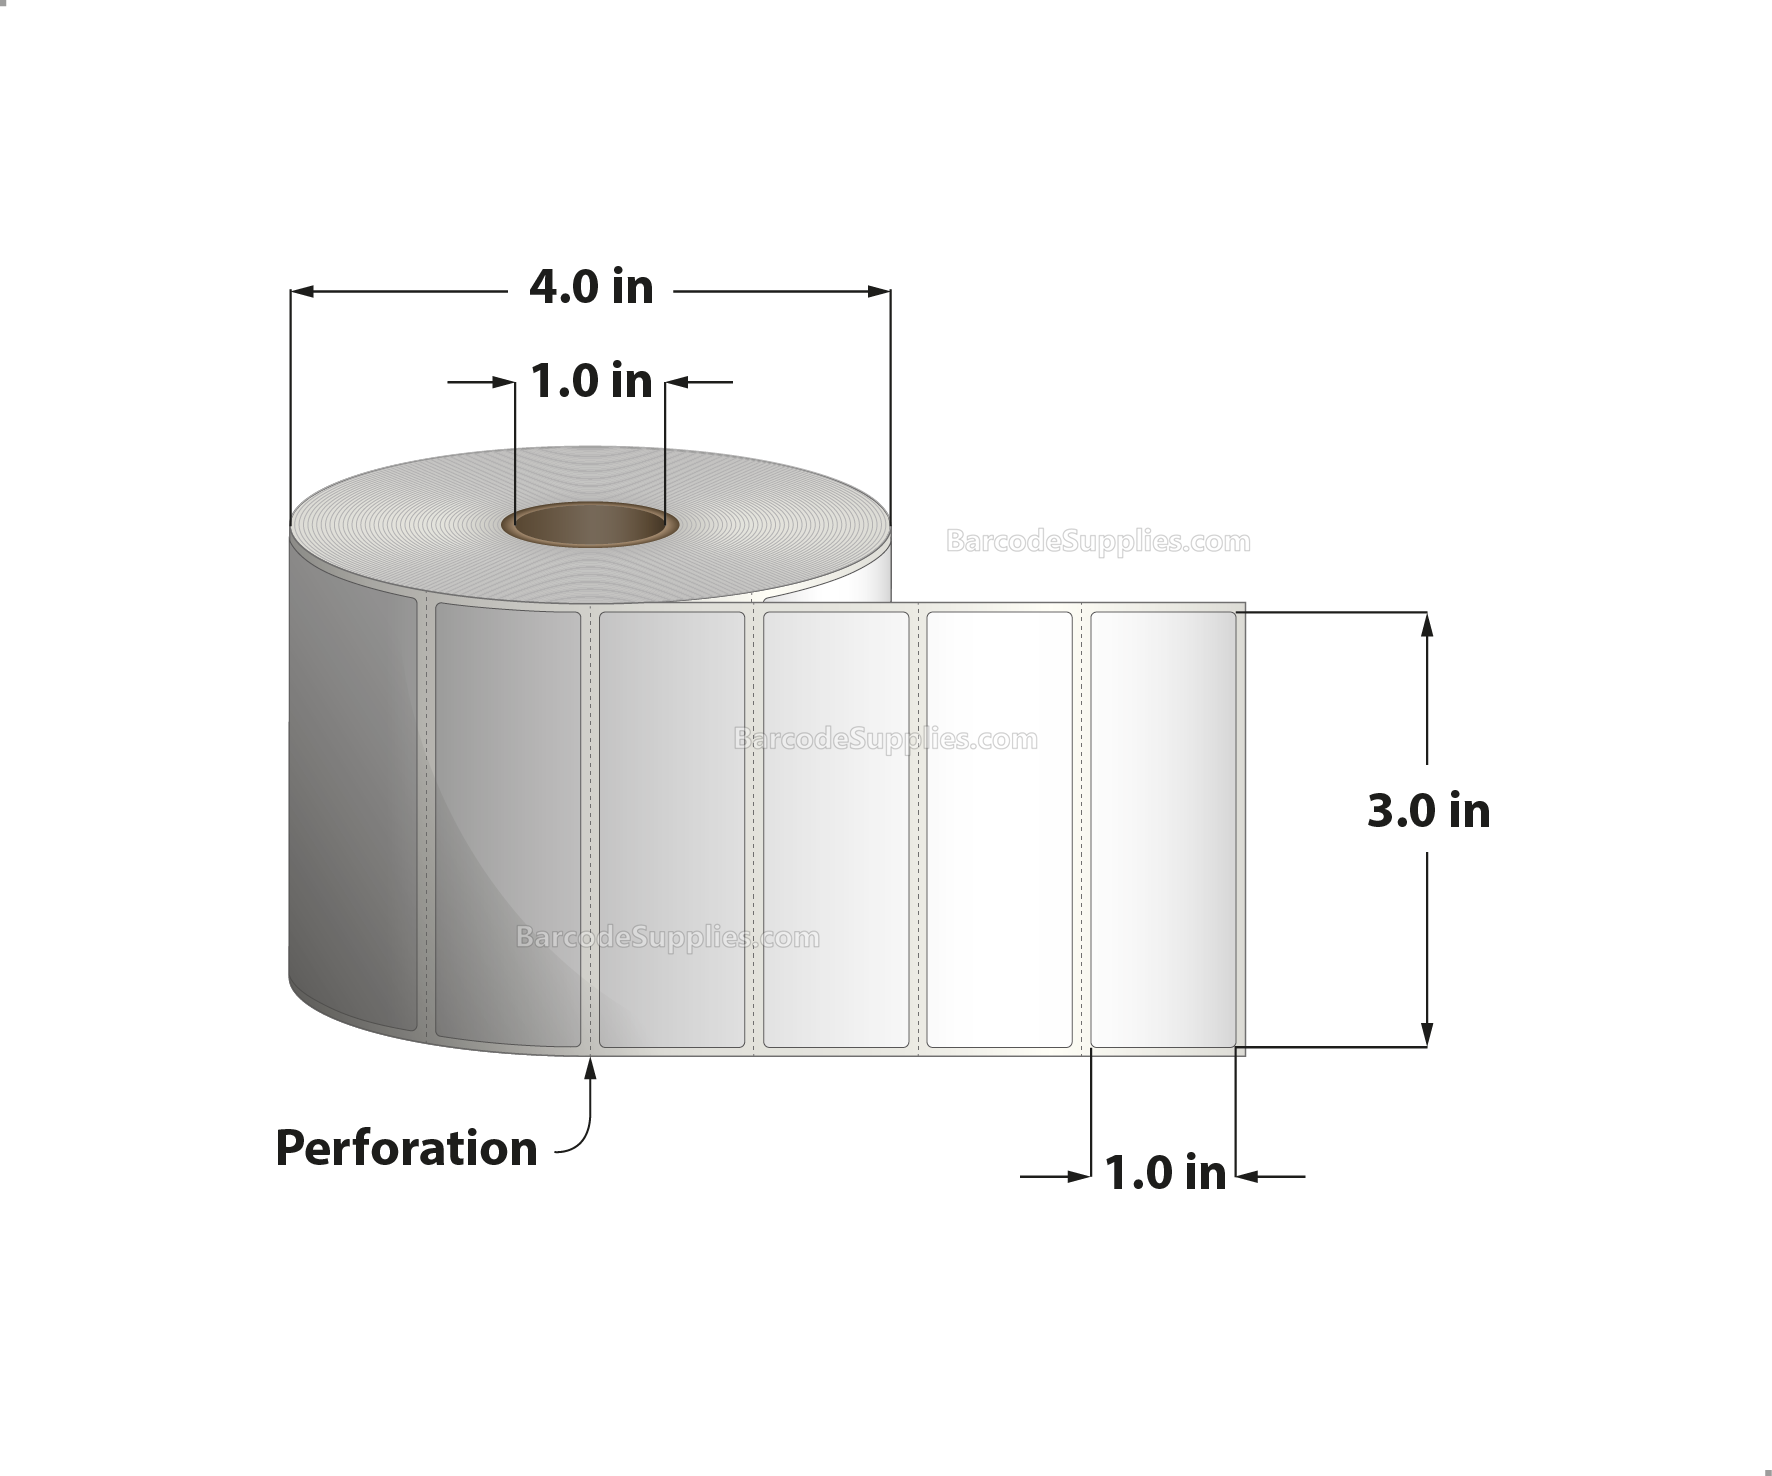 3 x 1 Thermal Transfer White Labels With Rubber Adhesive - Perforated - 1310 Labels Per Roll - Carton Of 12 Rolls - 15720 Labels Total - MPN: RTT4-300100-1P